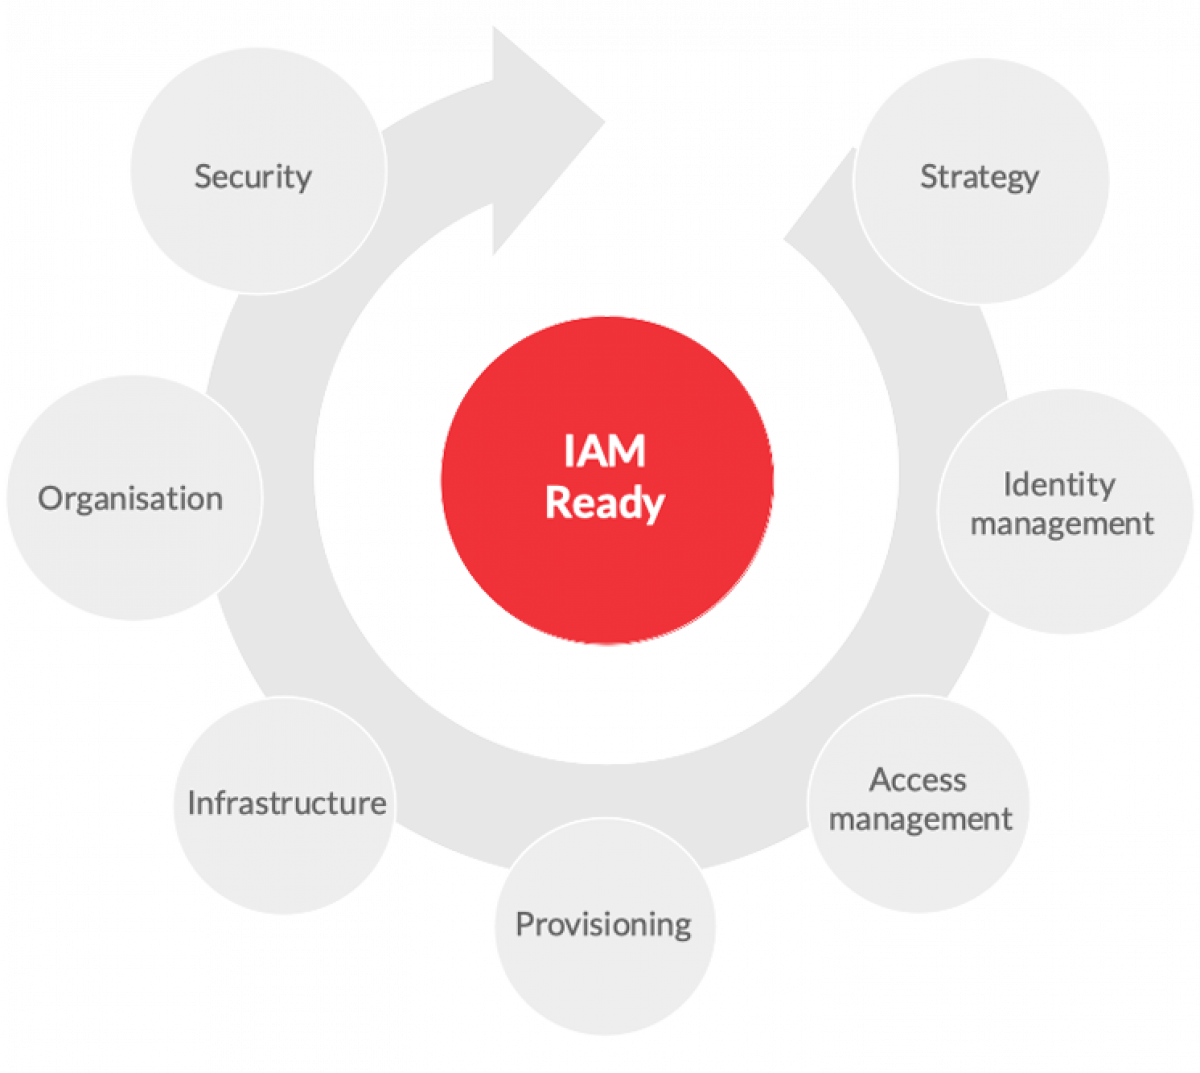 IAM strategy and aspects